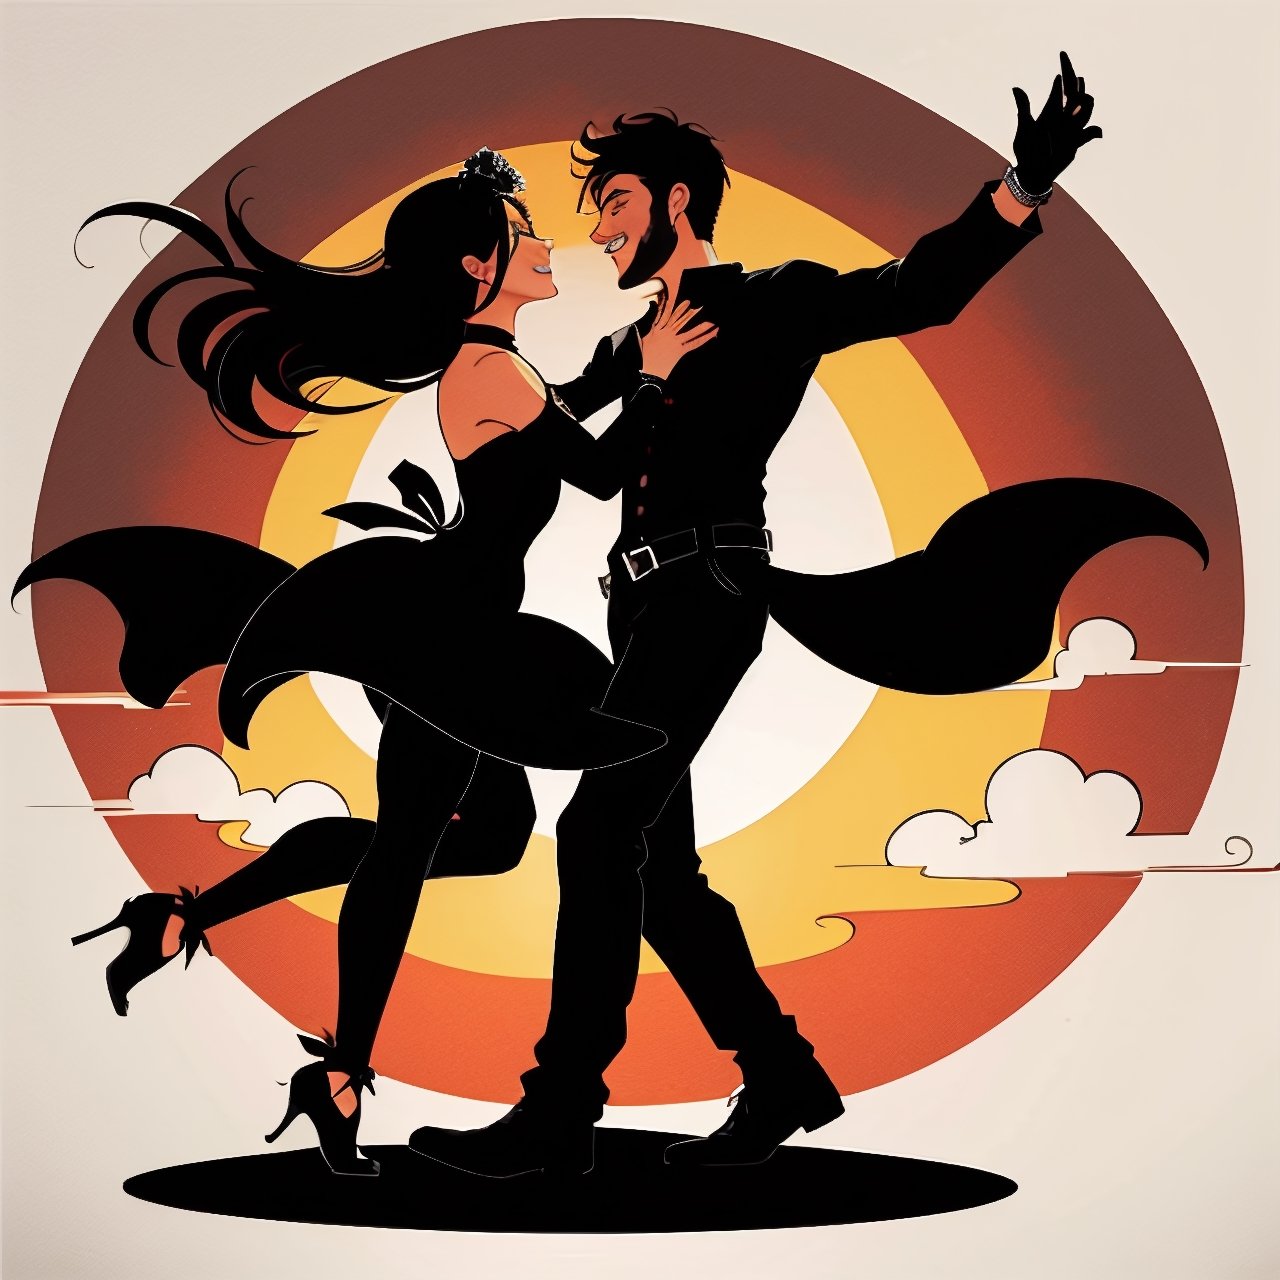 Dark silhowette of a couple dancing, against a single  five pointed star set inside a round sunset background, colorful,1 line drawing